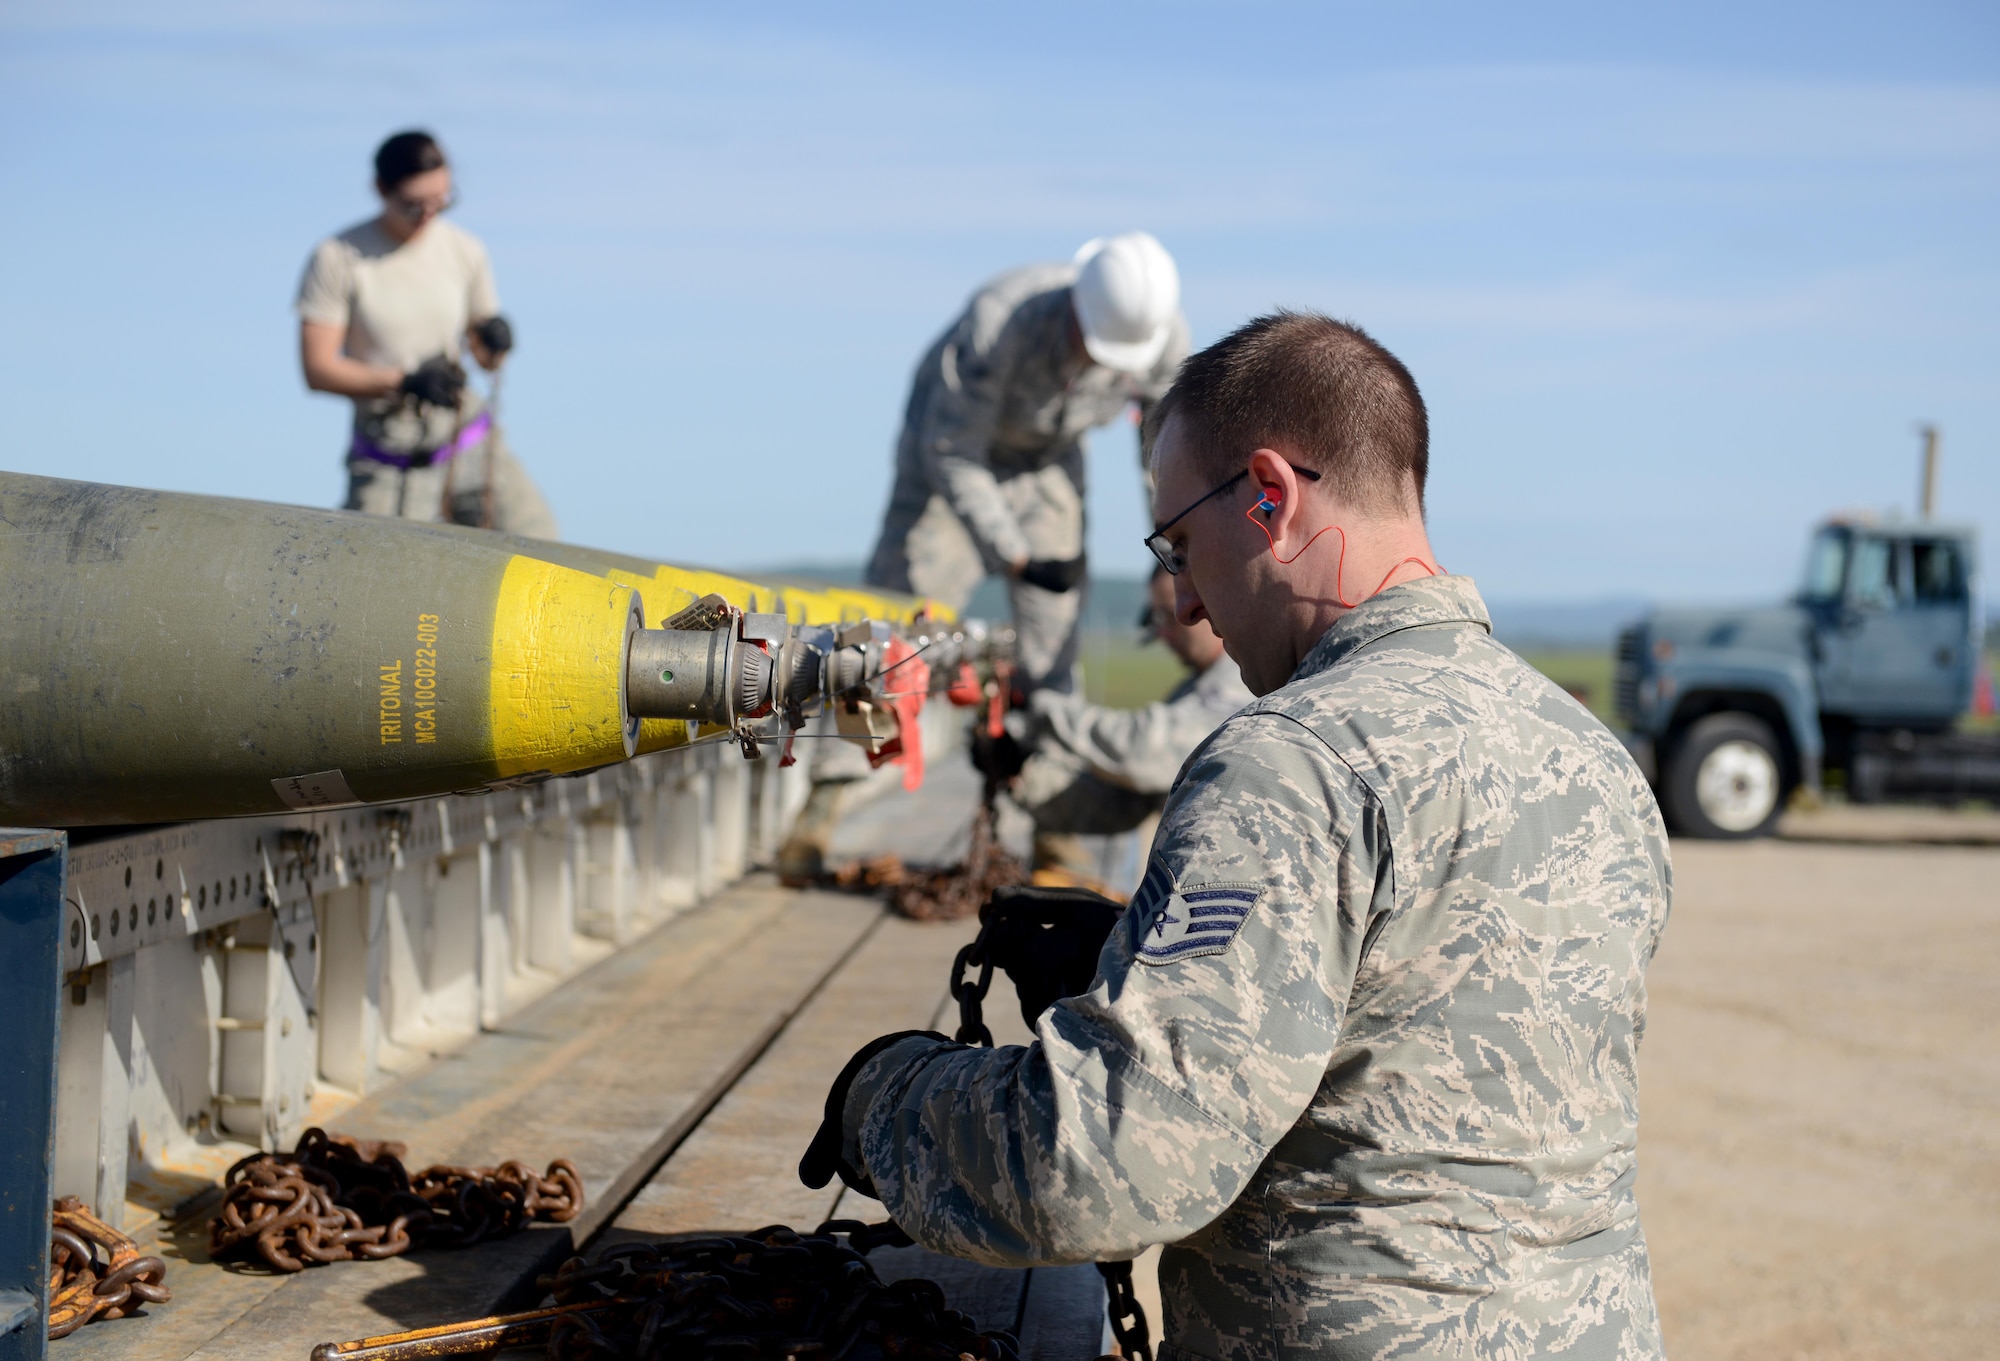 Airmen attending the Air Force Combat Ammunition Center (AFCOMAC) Combat Ammunition Planning and Production course, load ordnance onto a truck March 15, 2016, at Beale Air Force Base, California. AFCOMAC is celebrating its’ 30th Anniversary this year. (U.S. Air Force photo by Senior Airman Bobby Cummings)